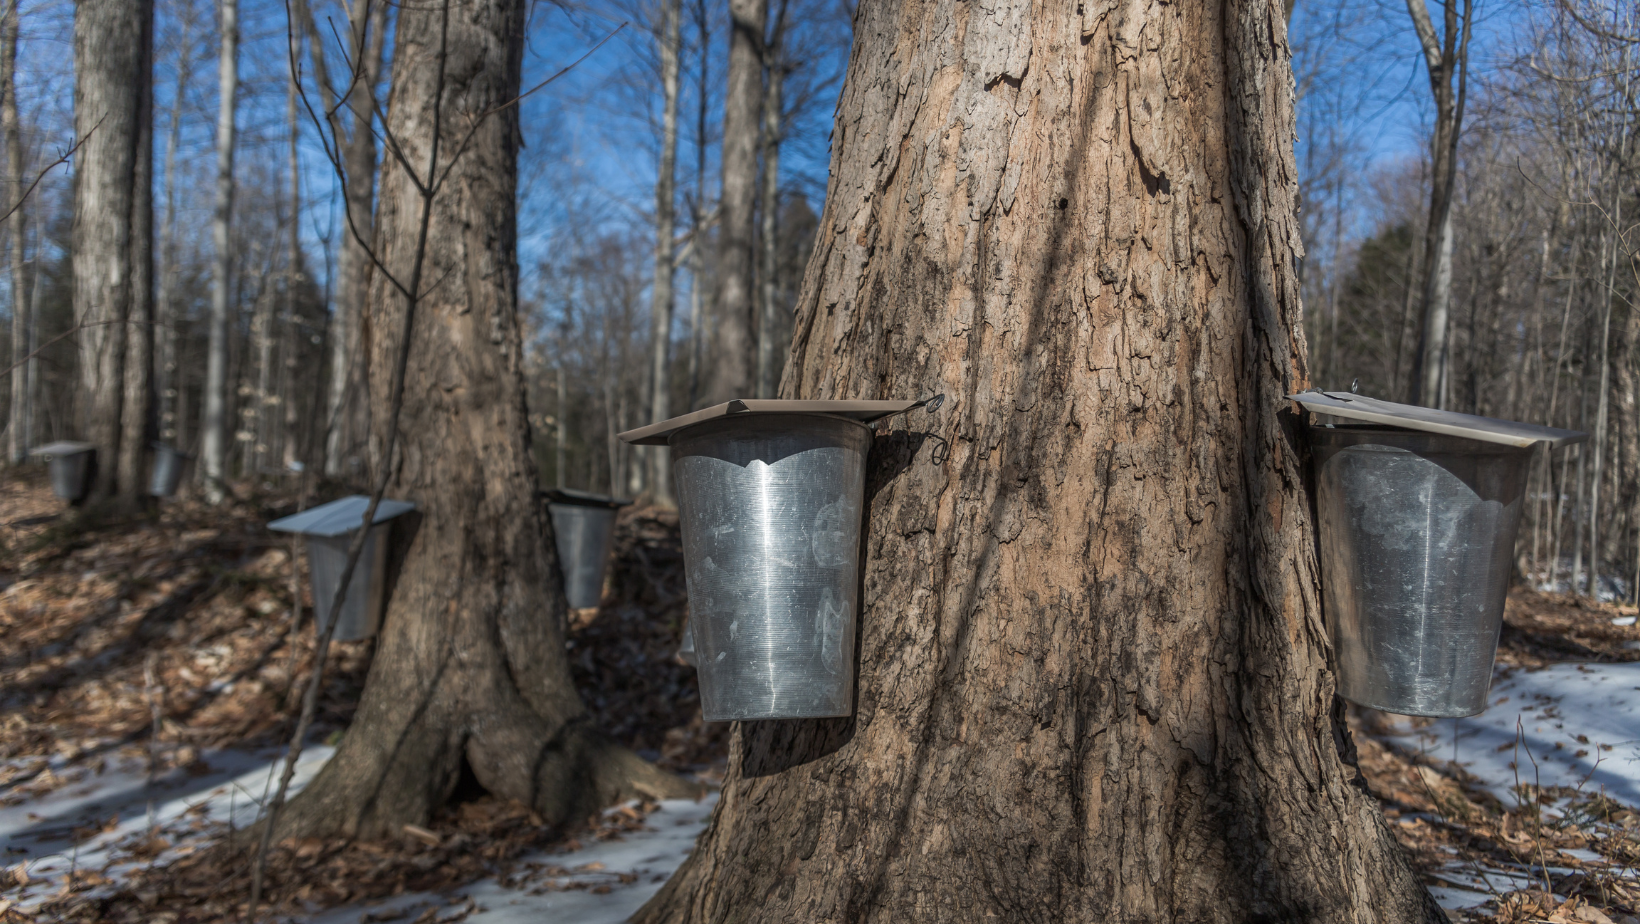 Maple sap water being extracted from trees with silver buckets